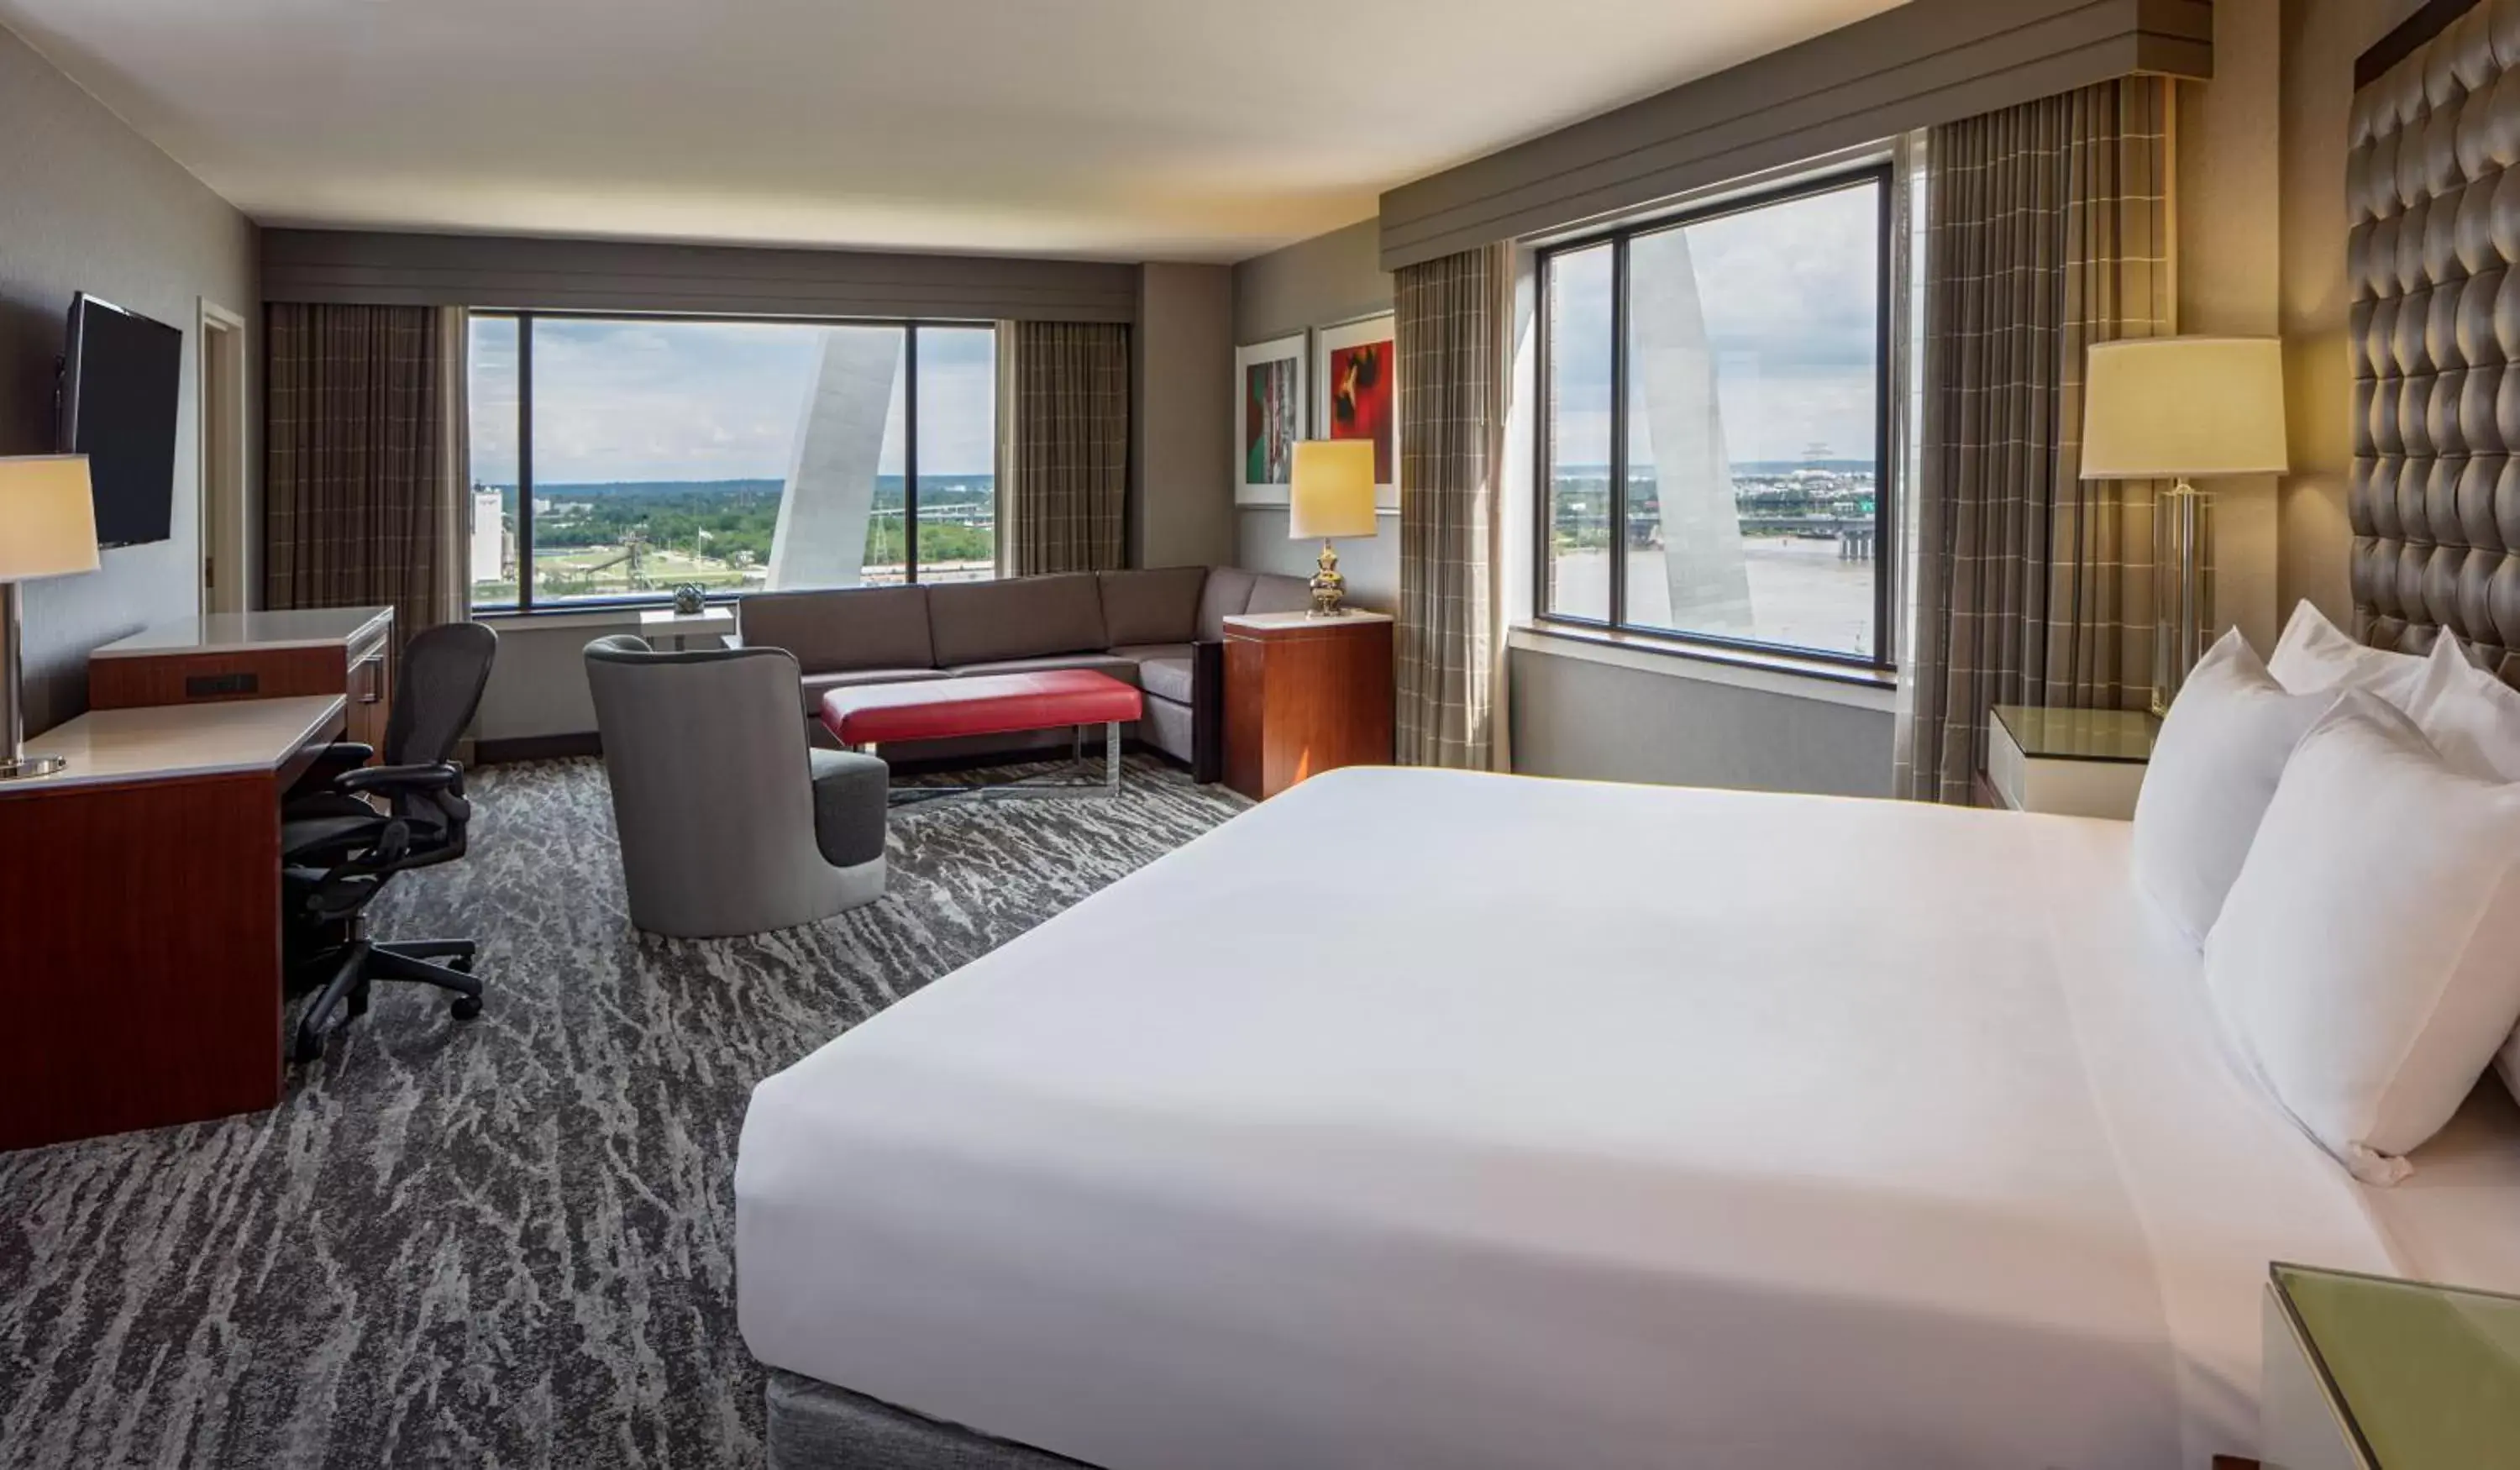 Deluxe King Room with View in Hyatt Regency Saint Louis at The Arch